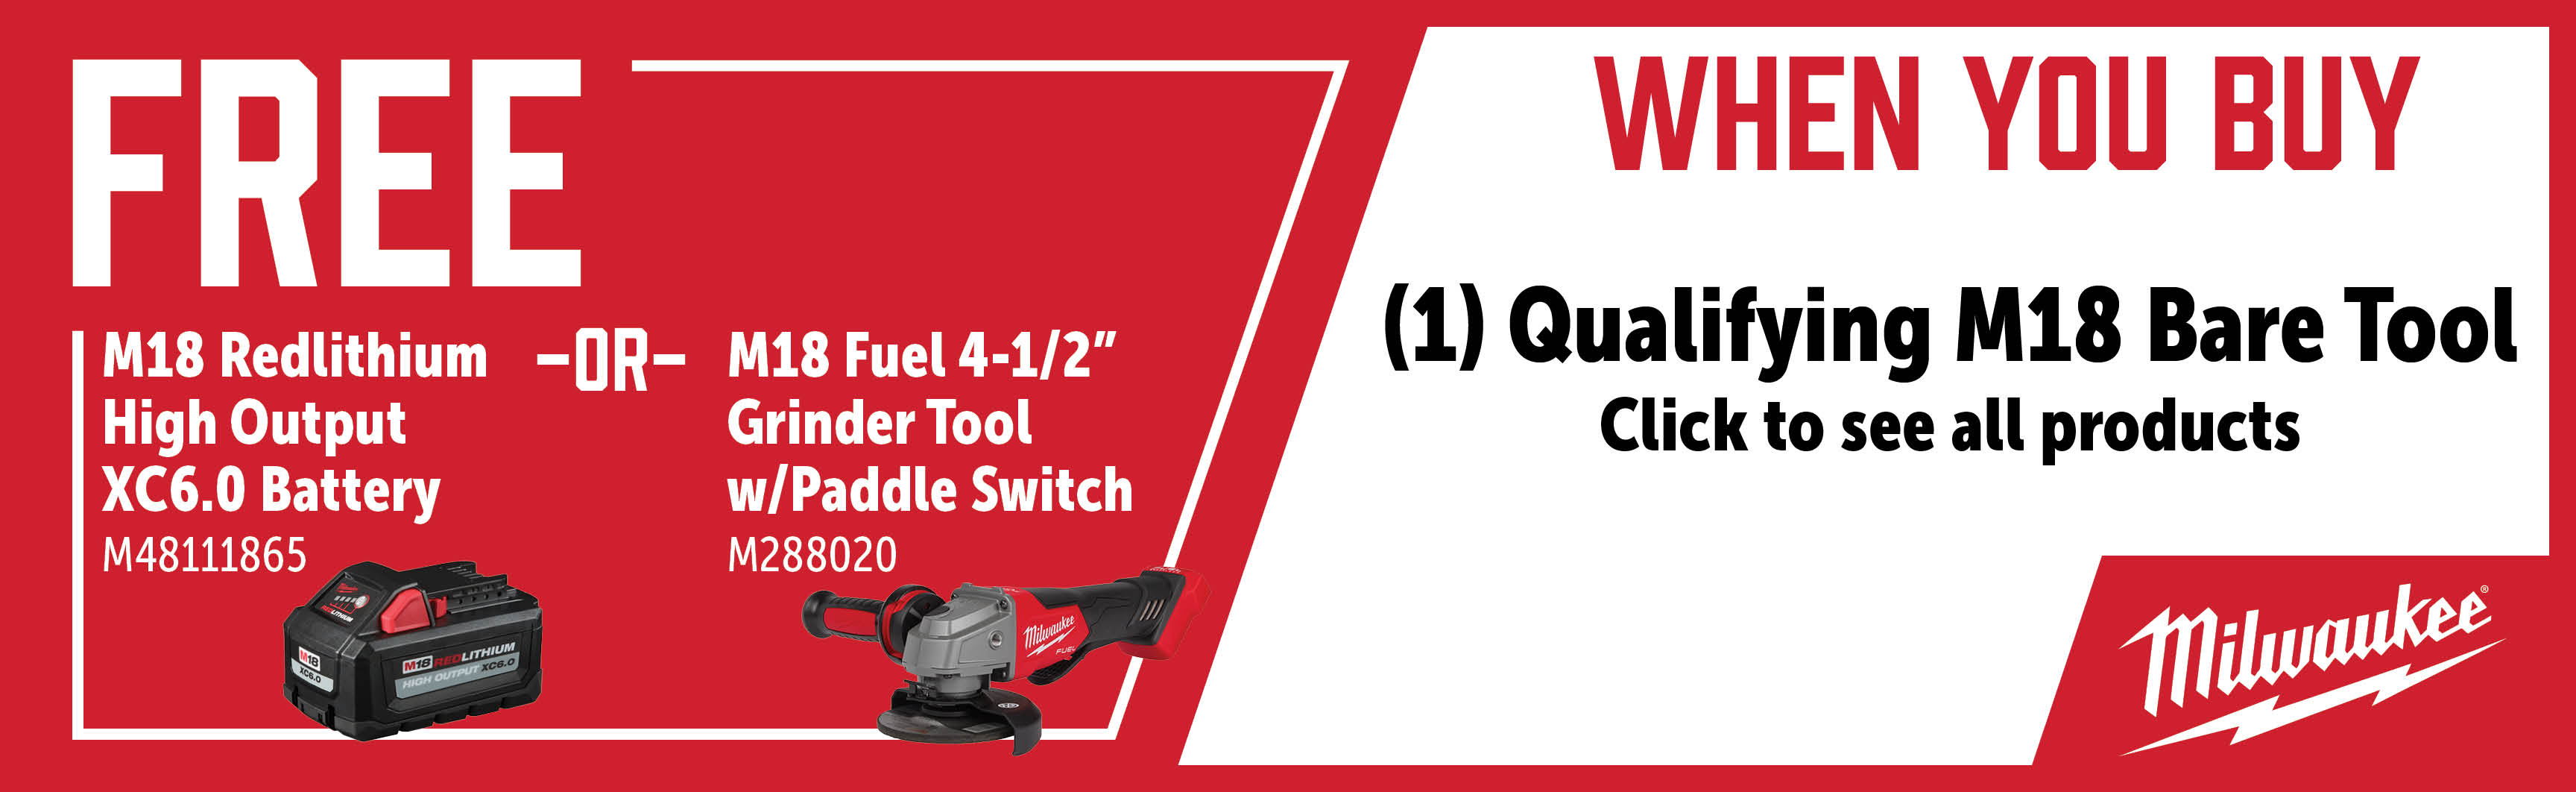 Milwaukee Aug-Oct: Buy a Qualifying M18 Bare Tool and Get a Free M48111865 or M288020